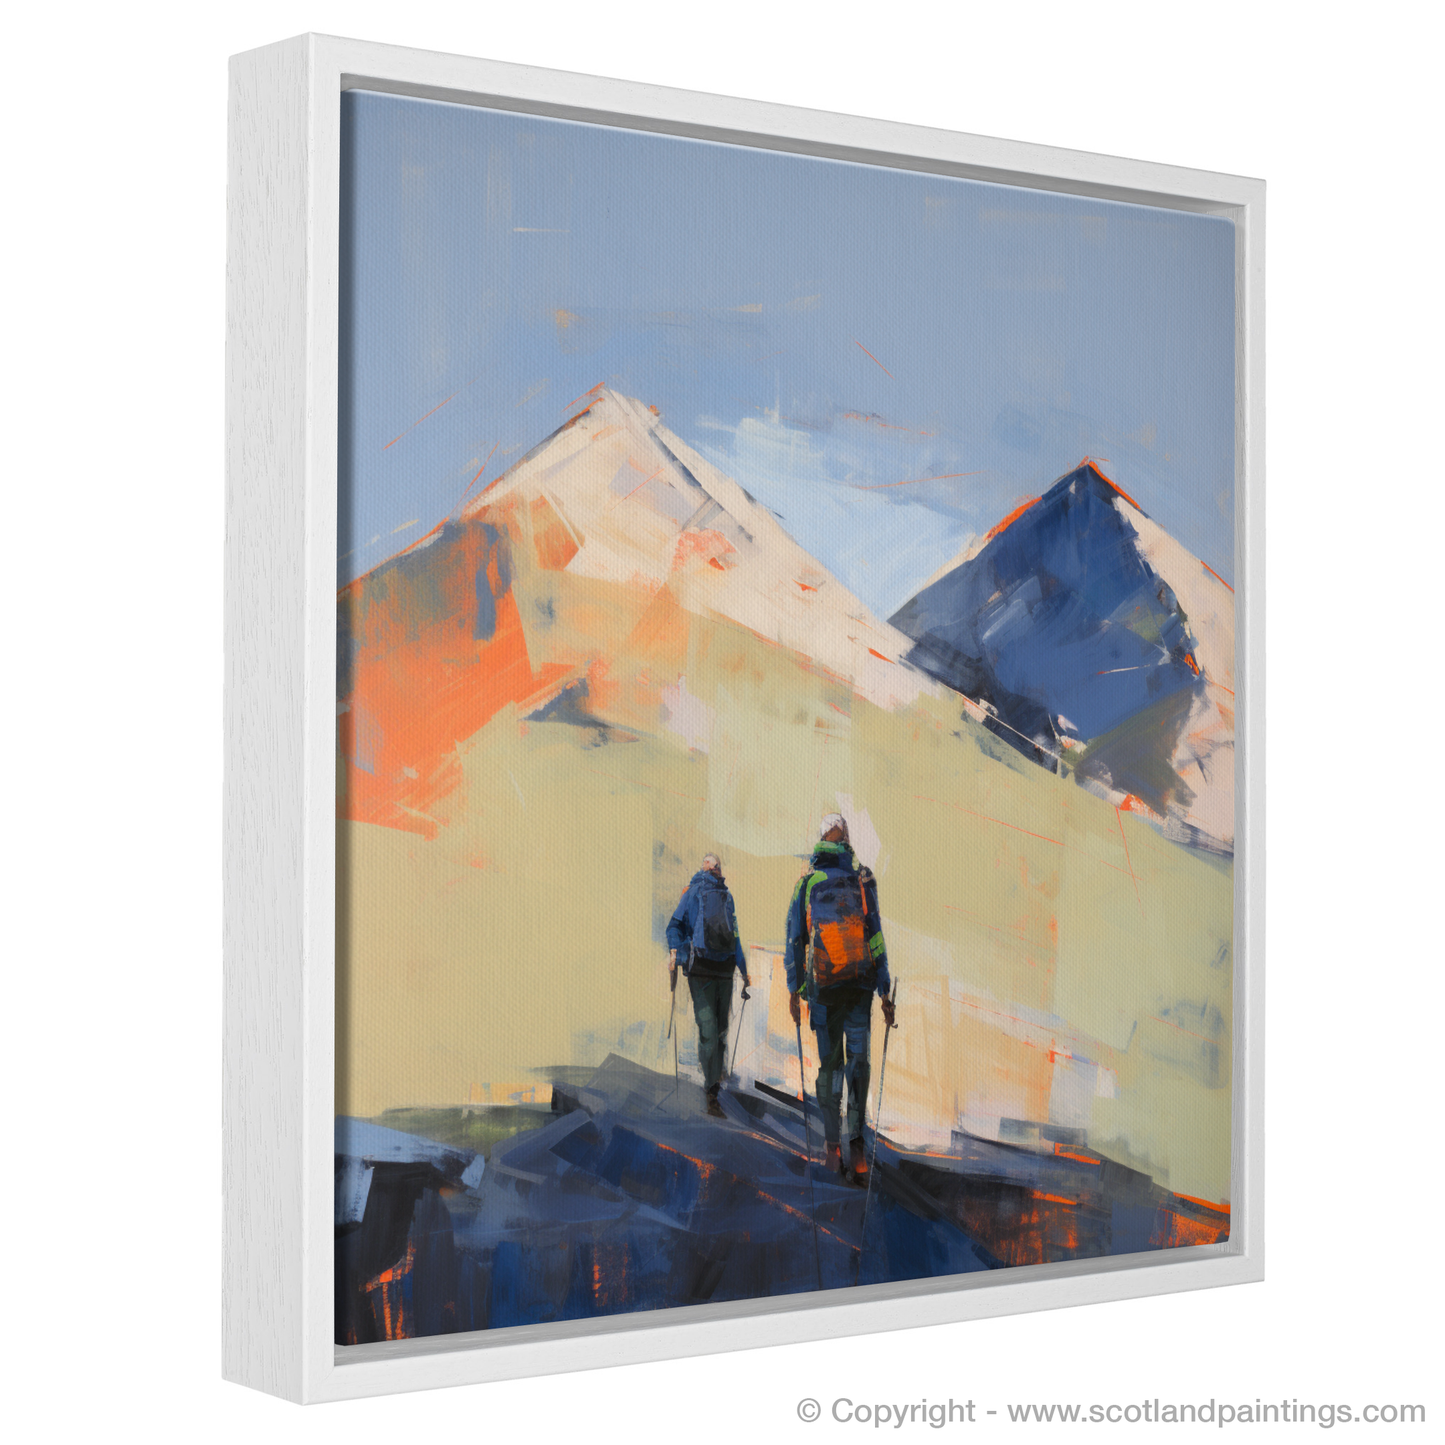 Painting and Art Print of Hikers in Glencoe entitled "Hikers' Odyssey in Abstract Glencoe".